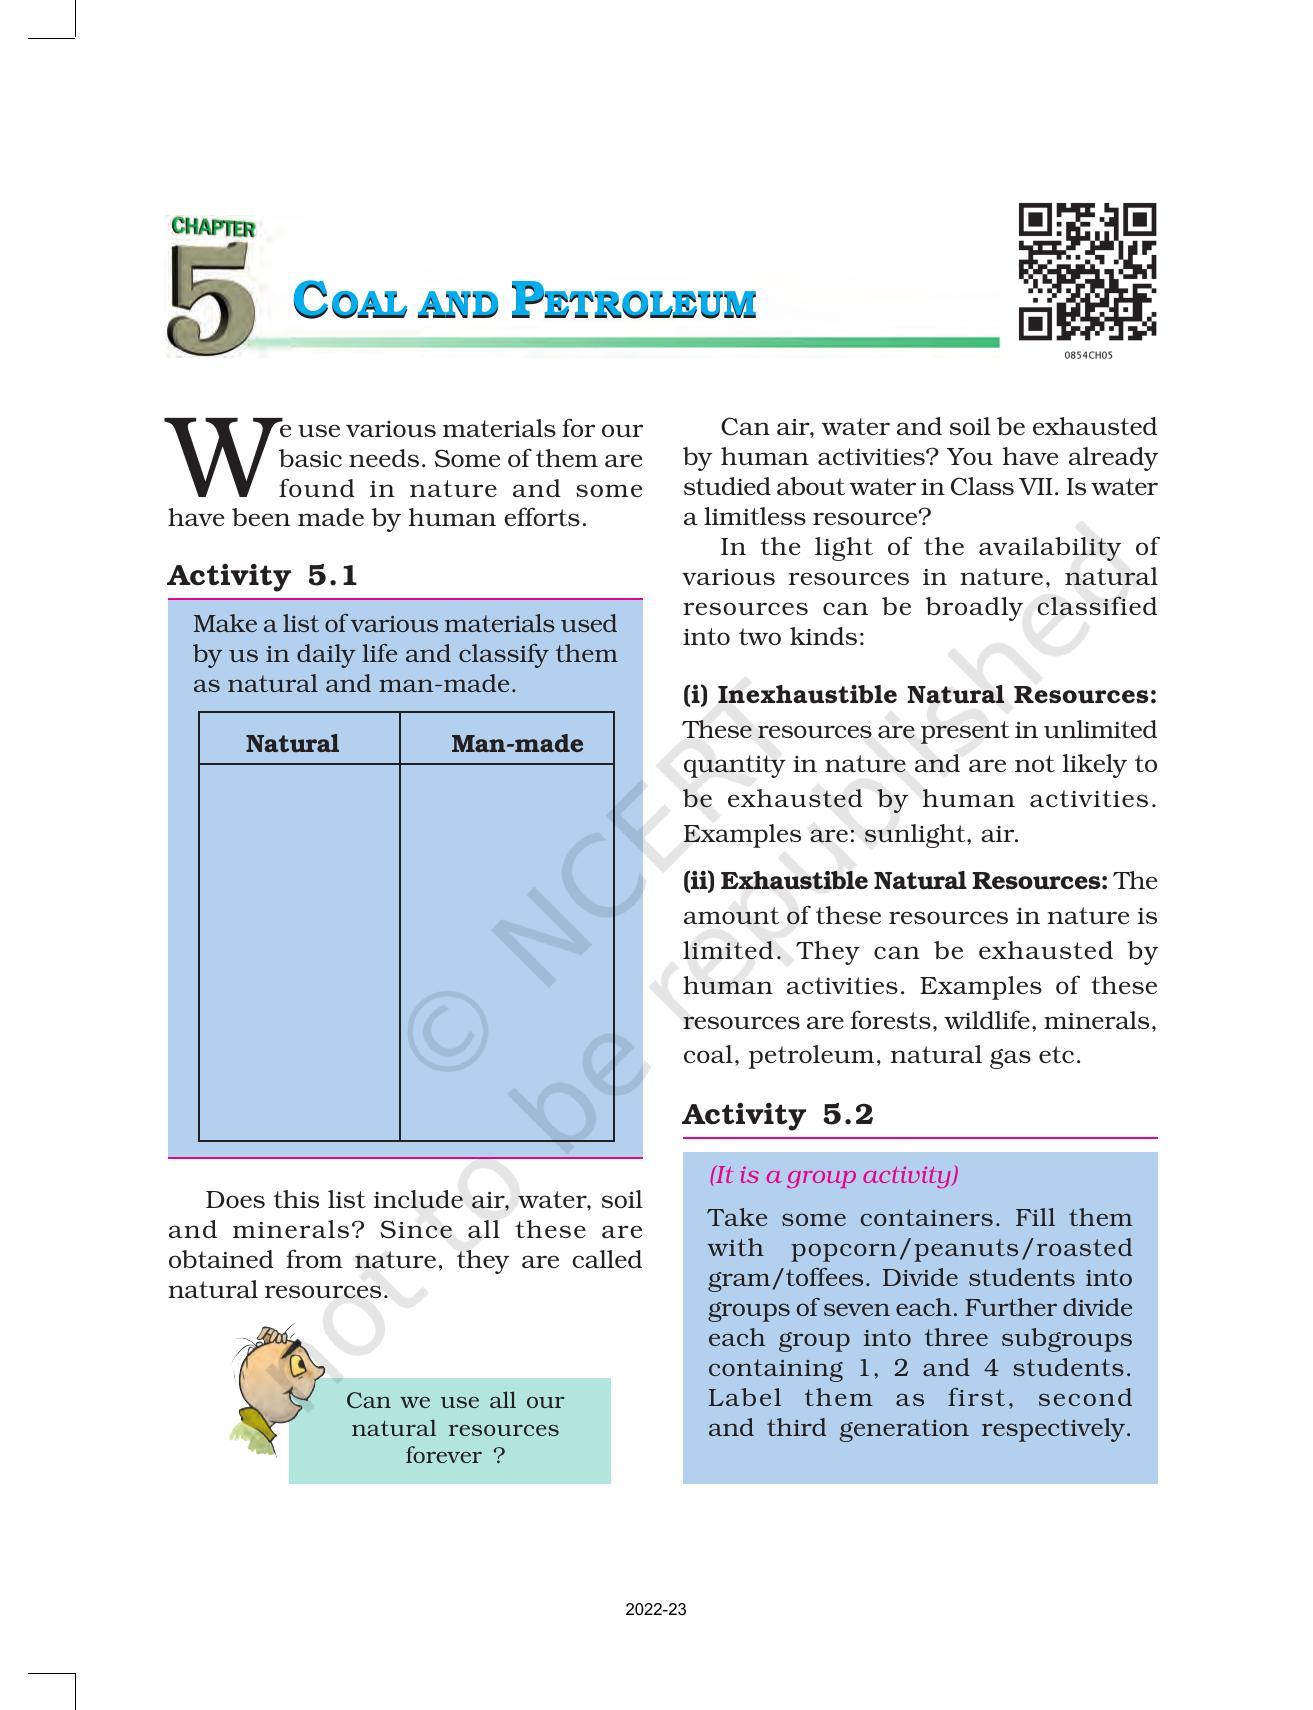 NCERT Book for Class 8 Science Chapter 5 Coal and Petroleum - Page 1